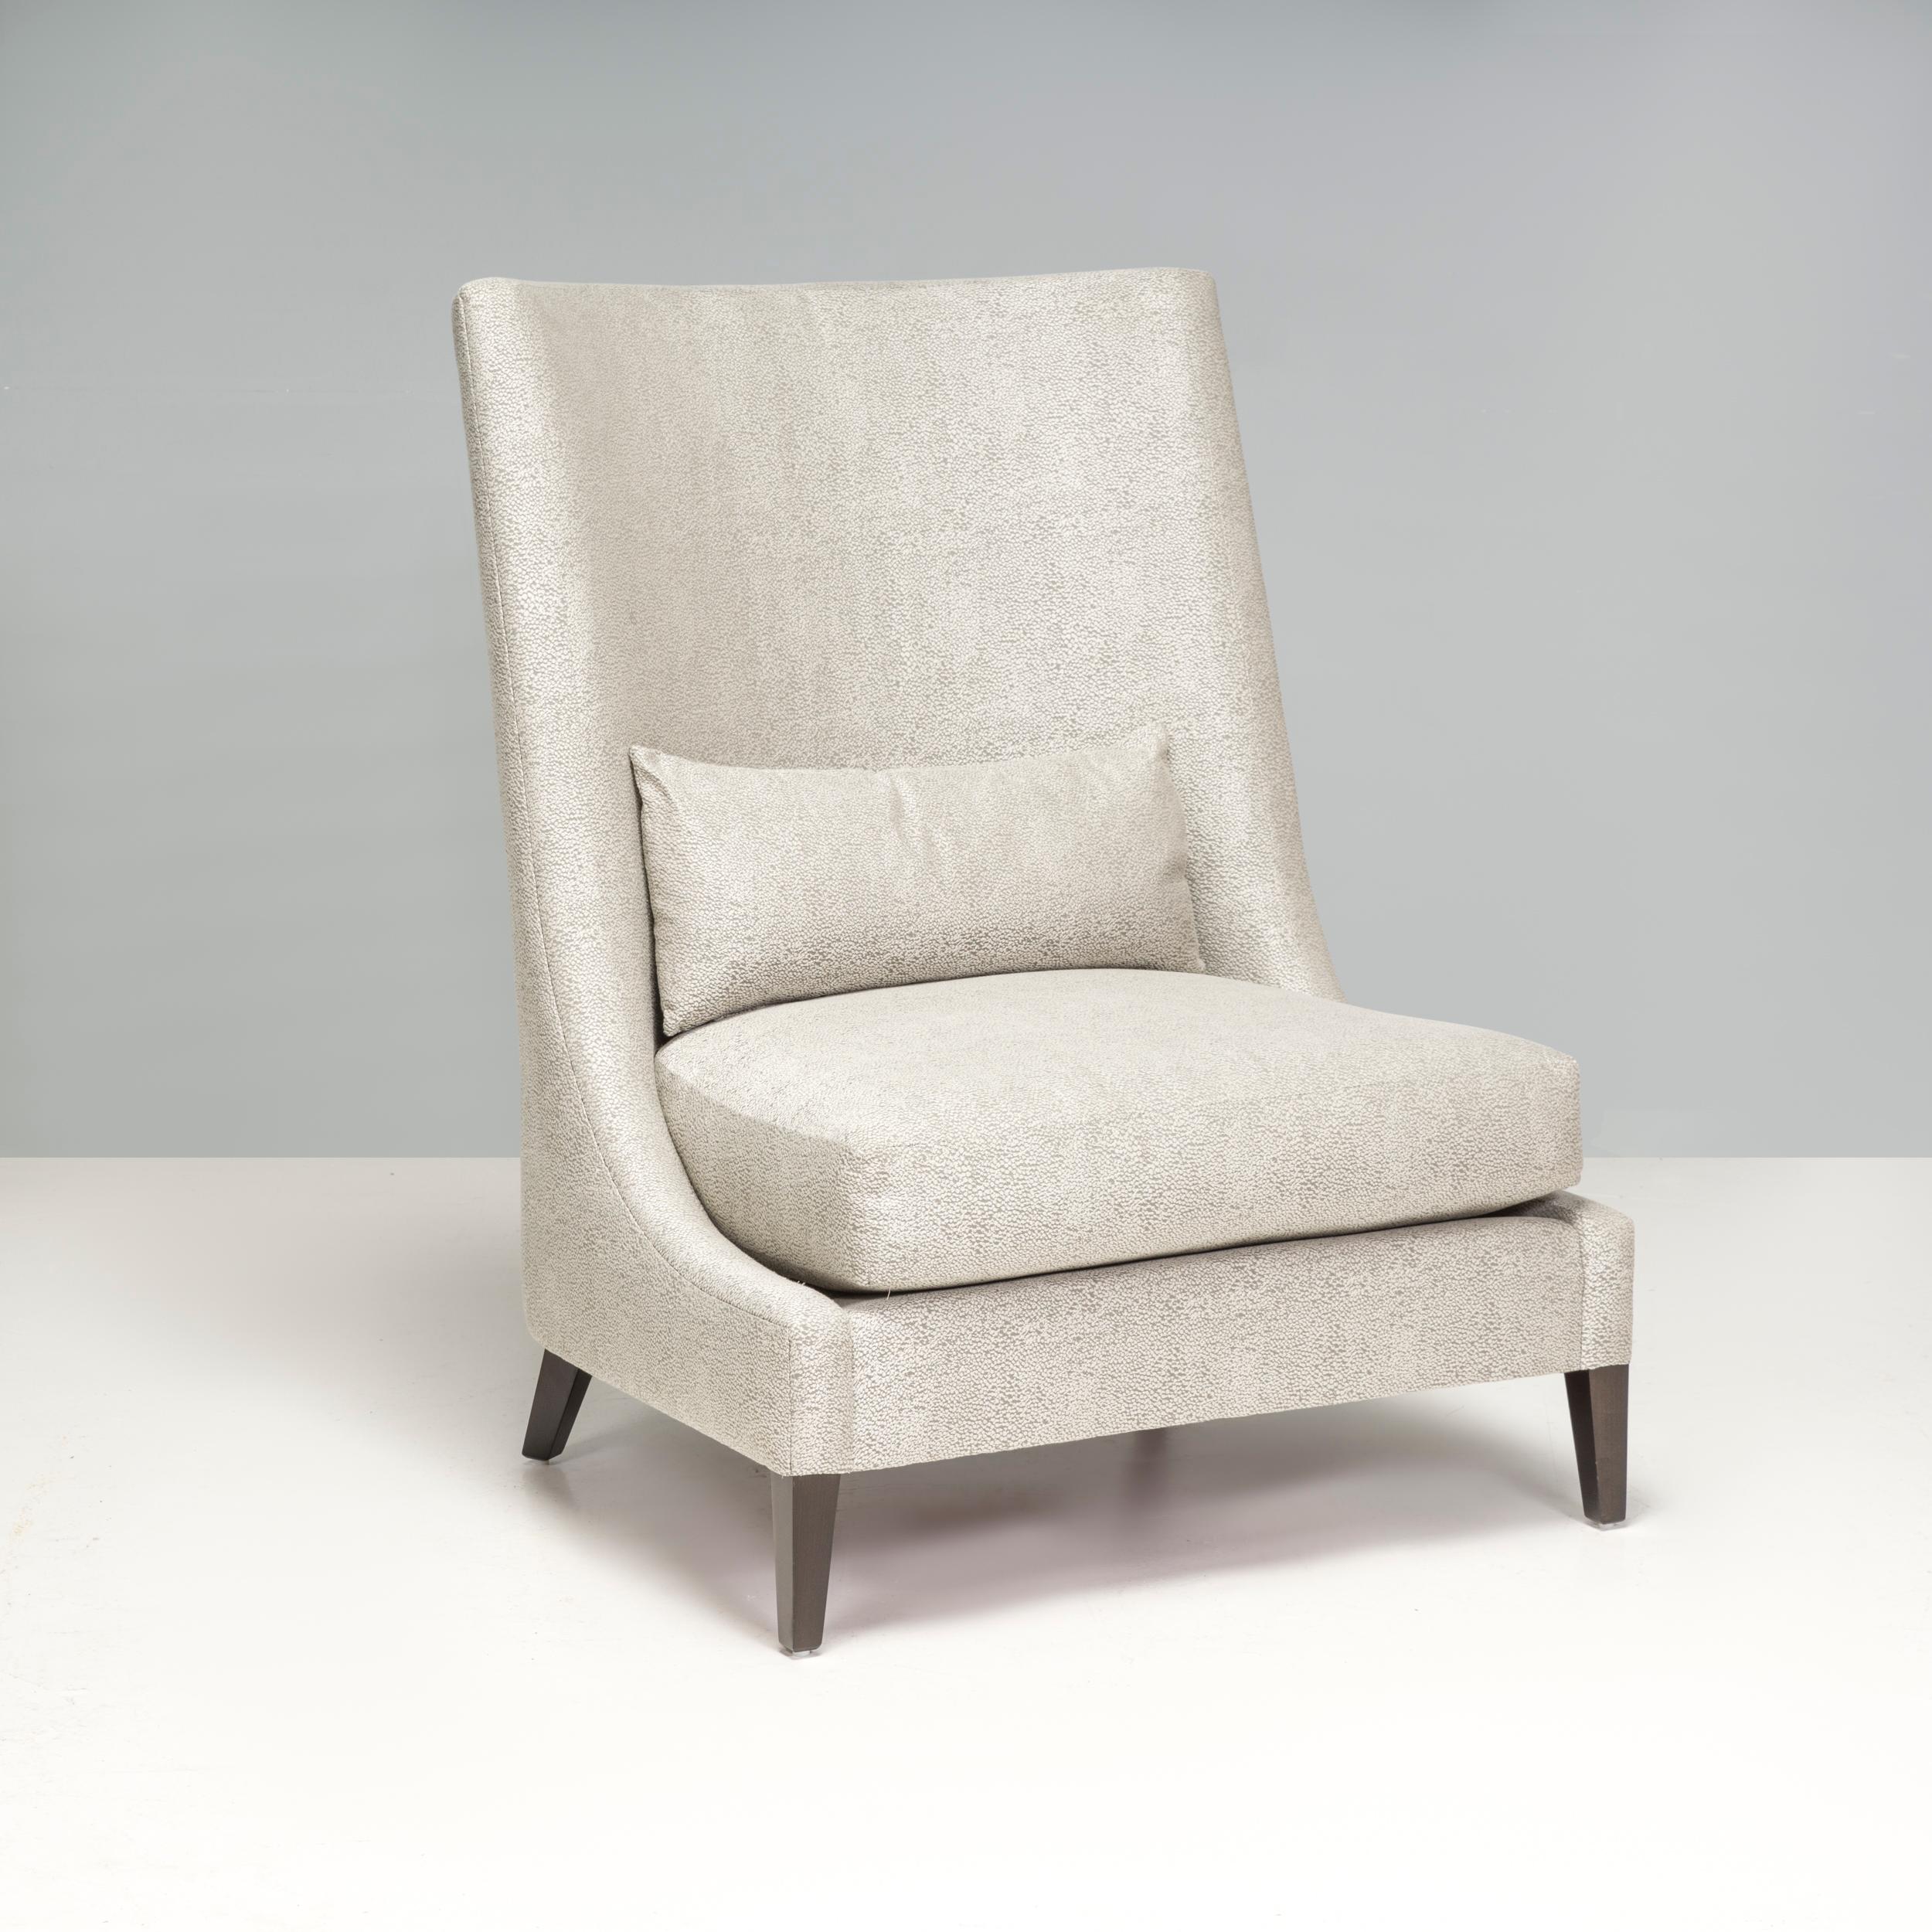 The light grey high back armchair has an impressive design that would elevate any living space or bedroom. 

The neutral colour palette mean it would harmonise well with a range of interior aesthetics. The back if the chair swoops into a low seat,